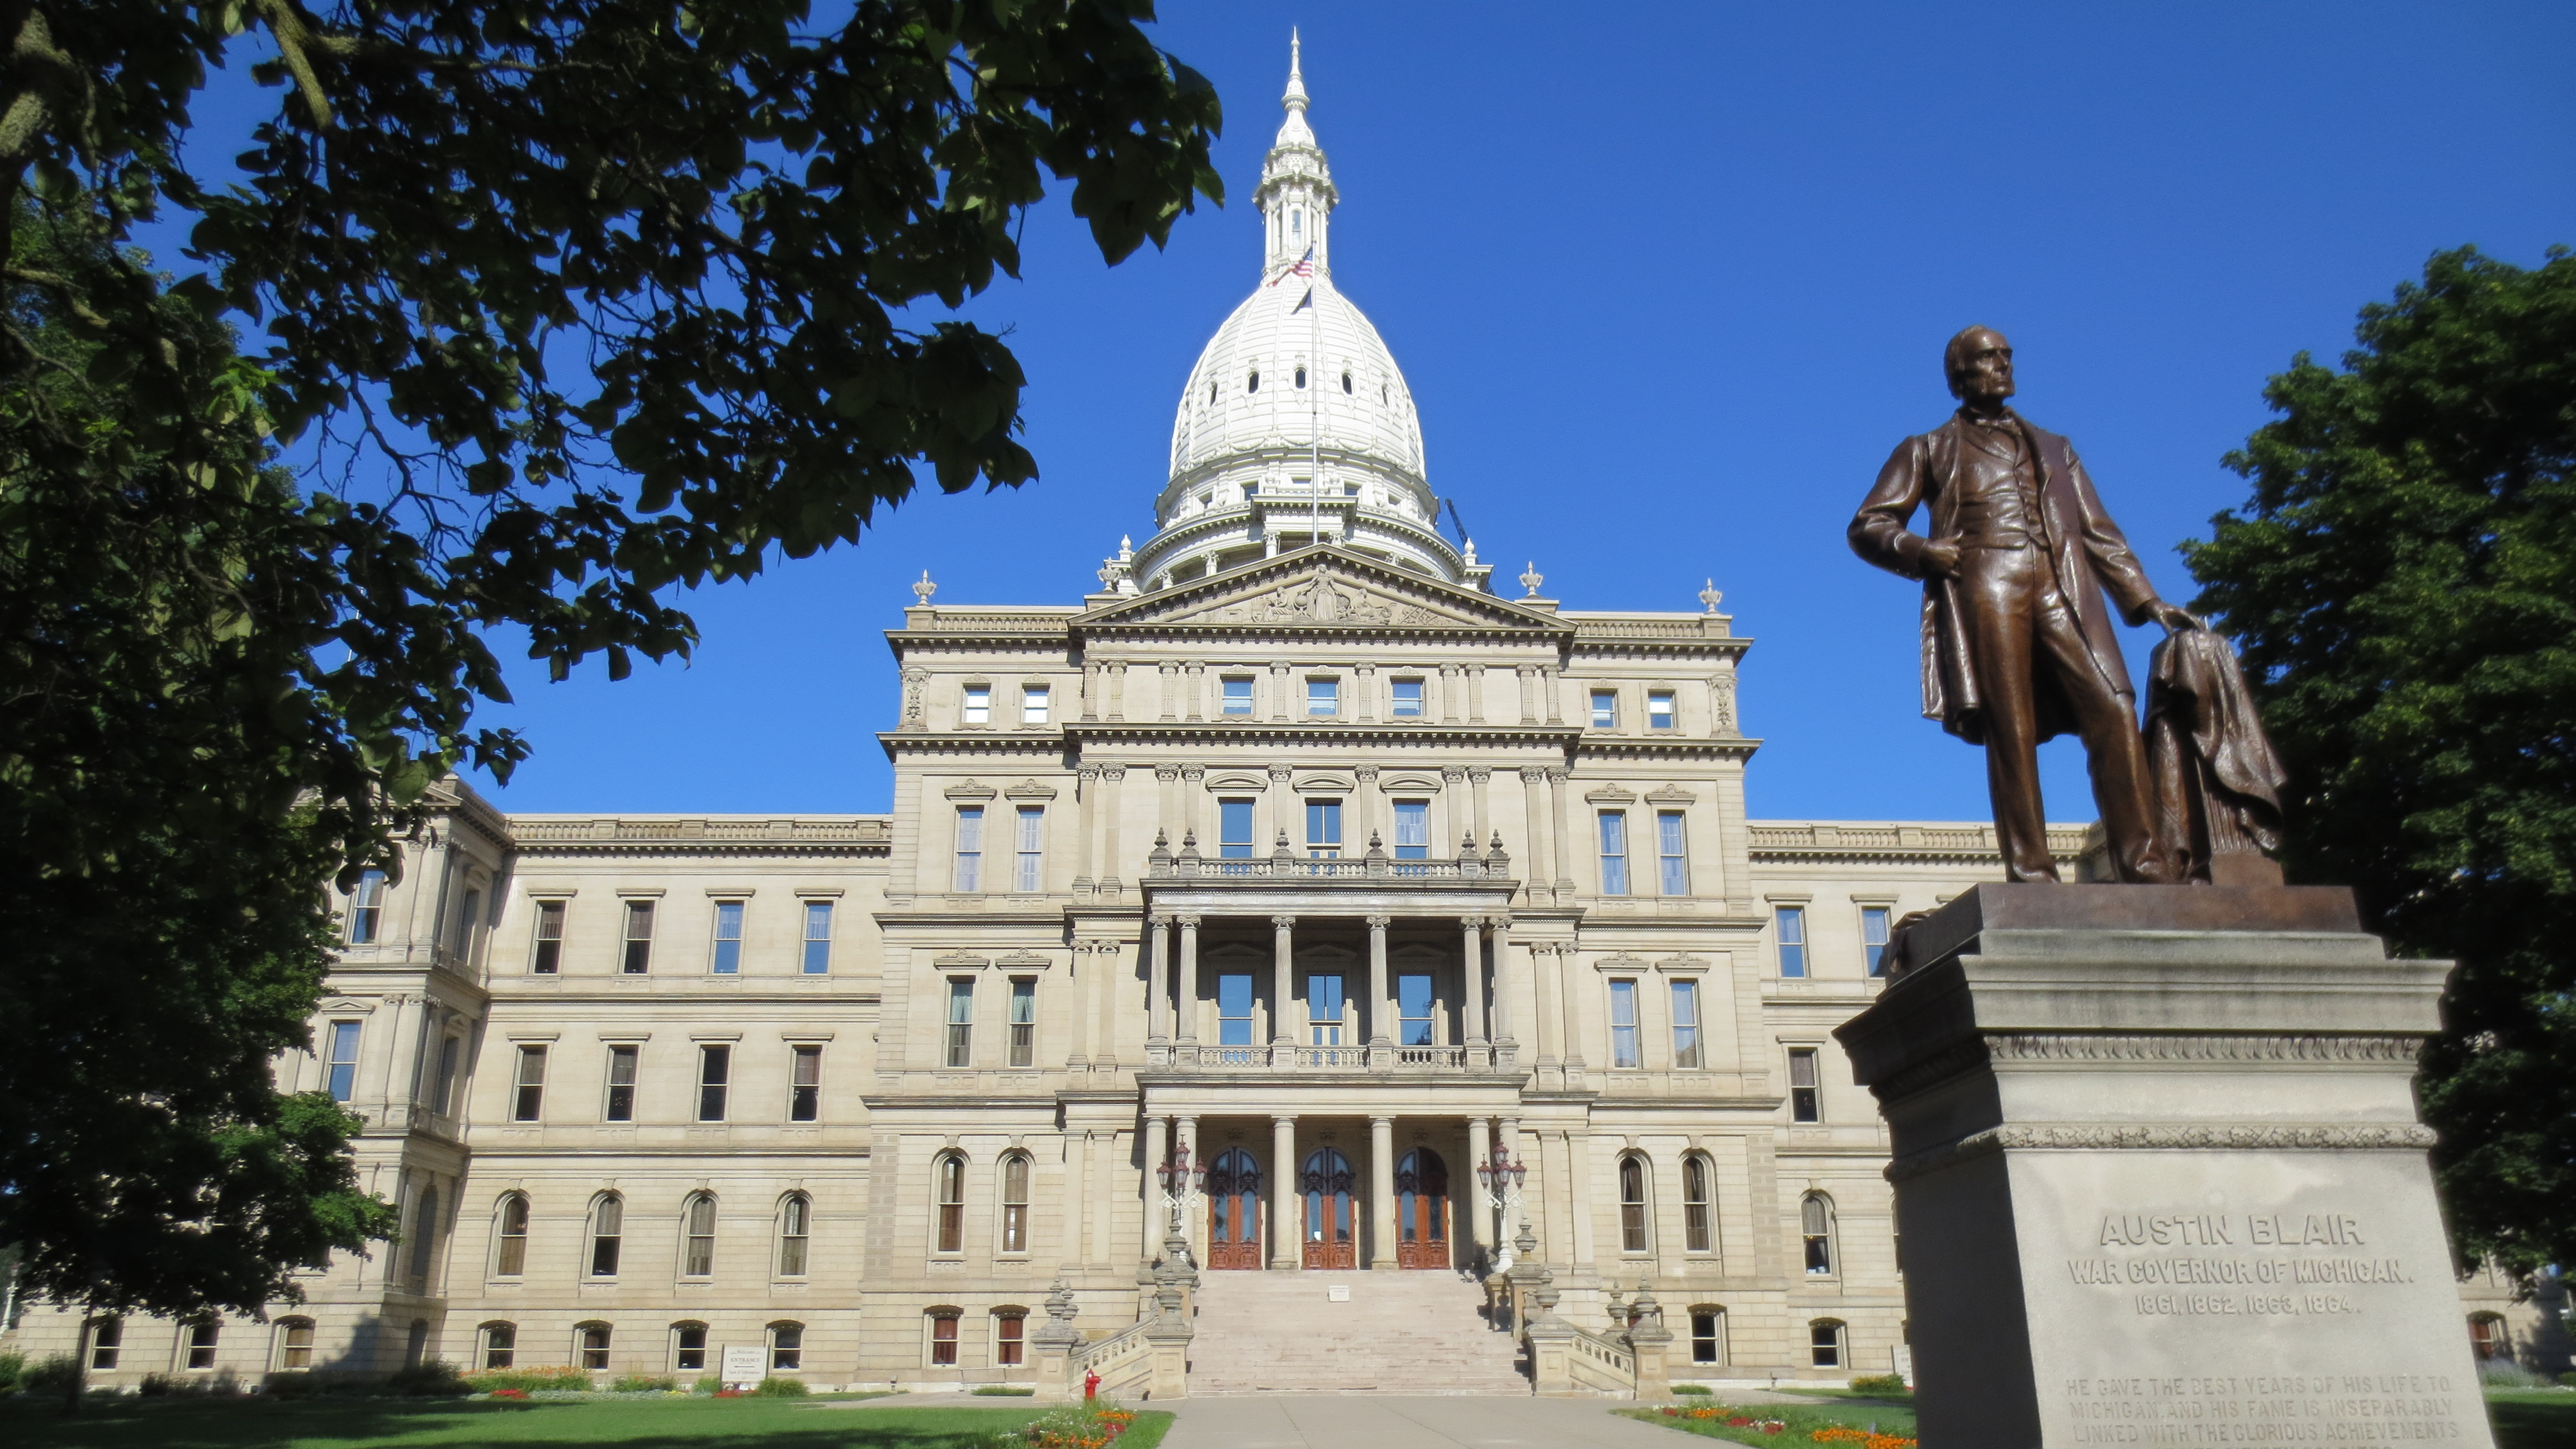 New legislation would automatically clear cannabis offenses from criminal records in Michigan